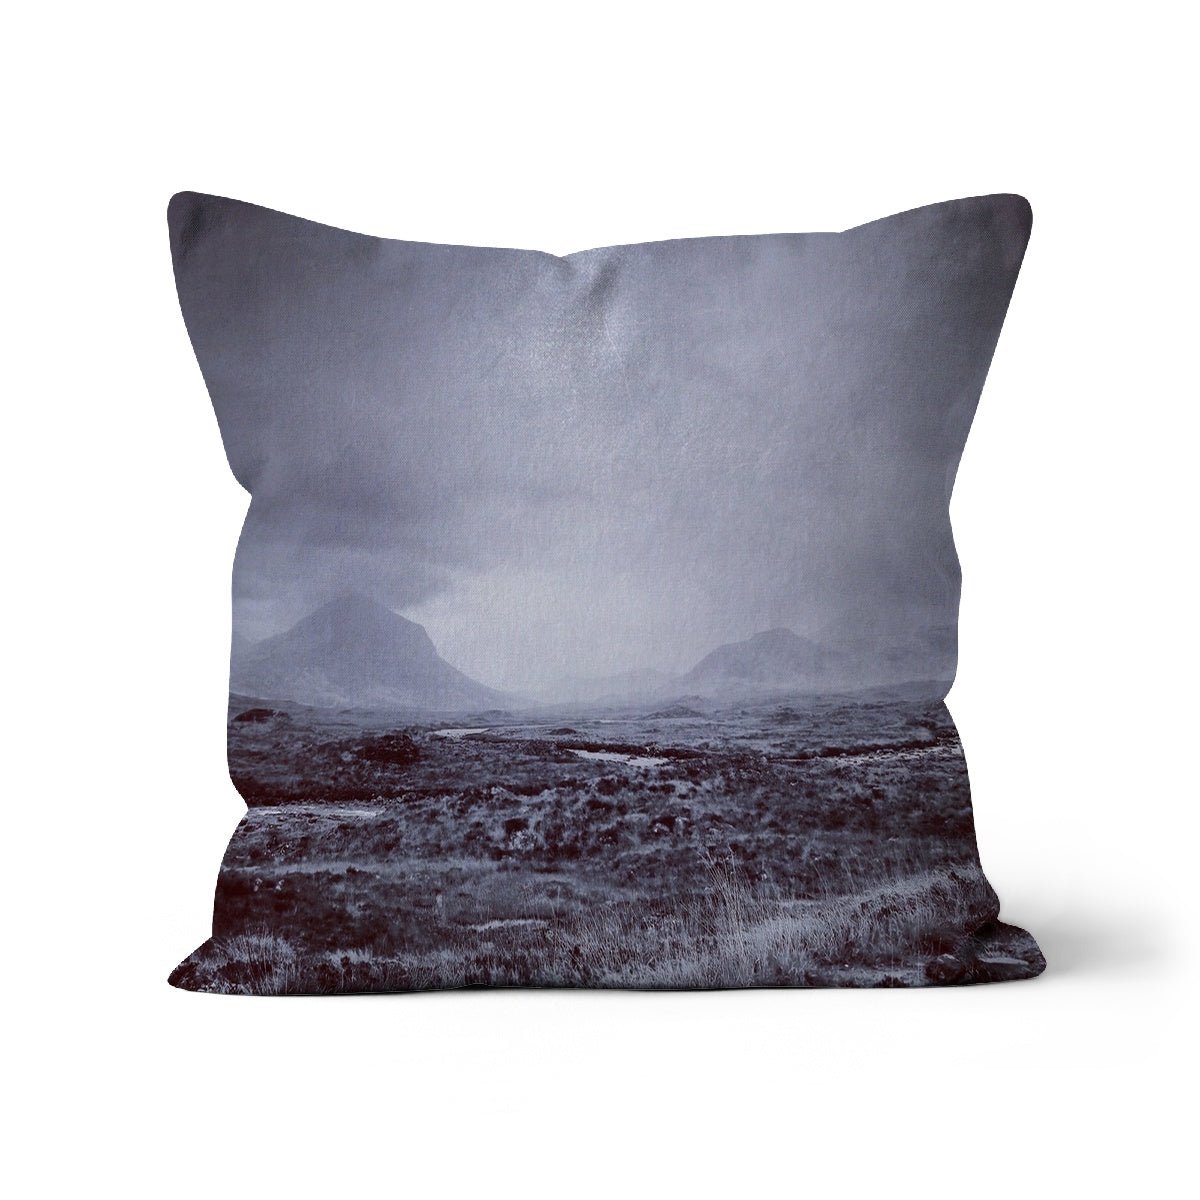 The Brooding Cuillin Skye Art Gifts Cushion-Cushions-Skye Art Gallery-Faux Suede-22"x22"-Paintings, Prints, Homeware, Art Gifts From Scotland By Scottish Artist Kevin Hunter